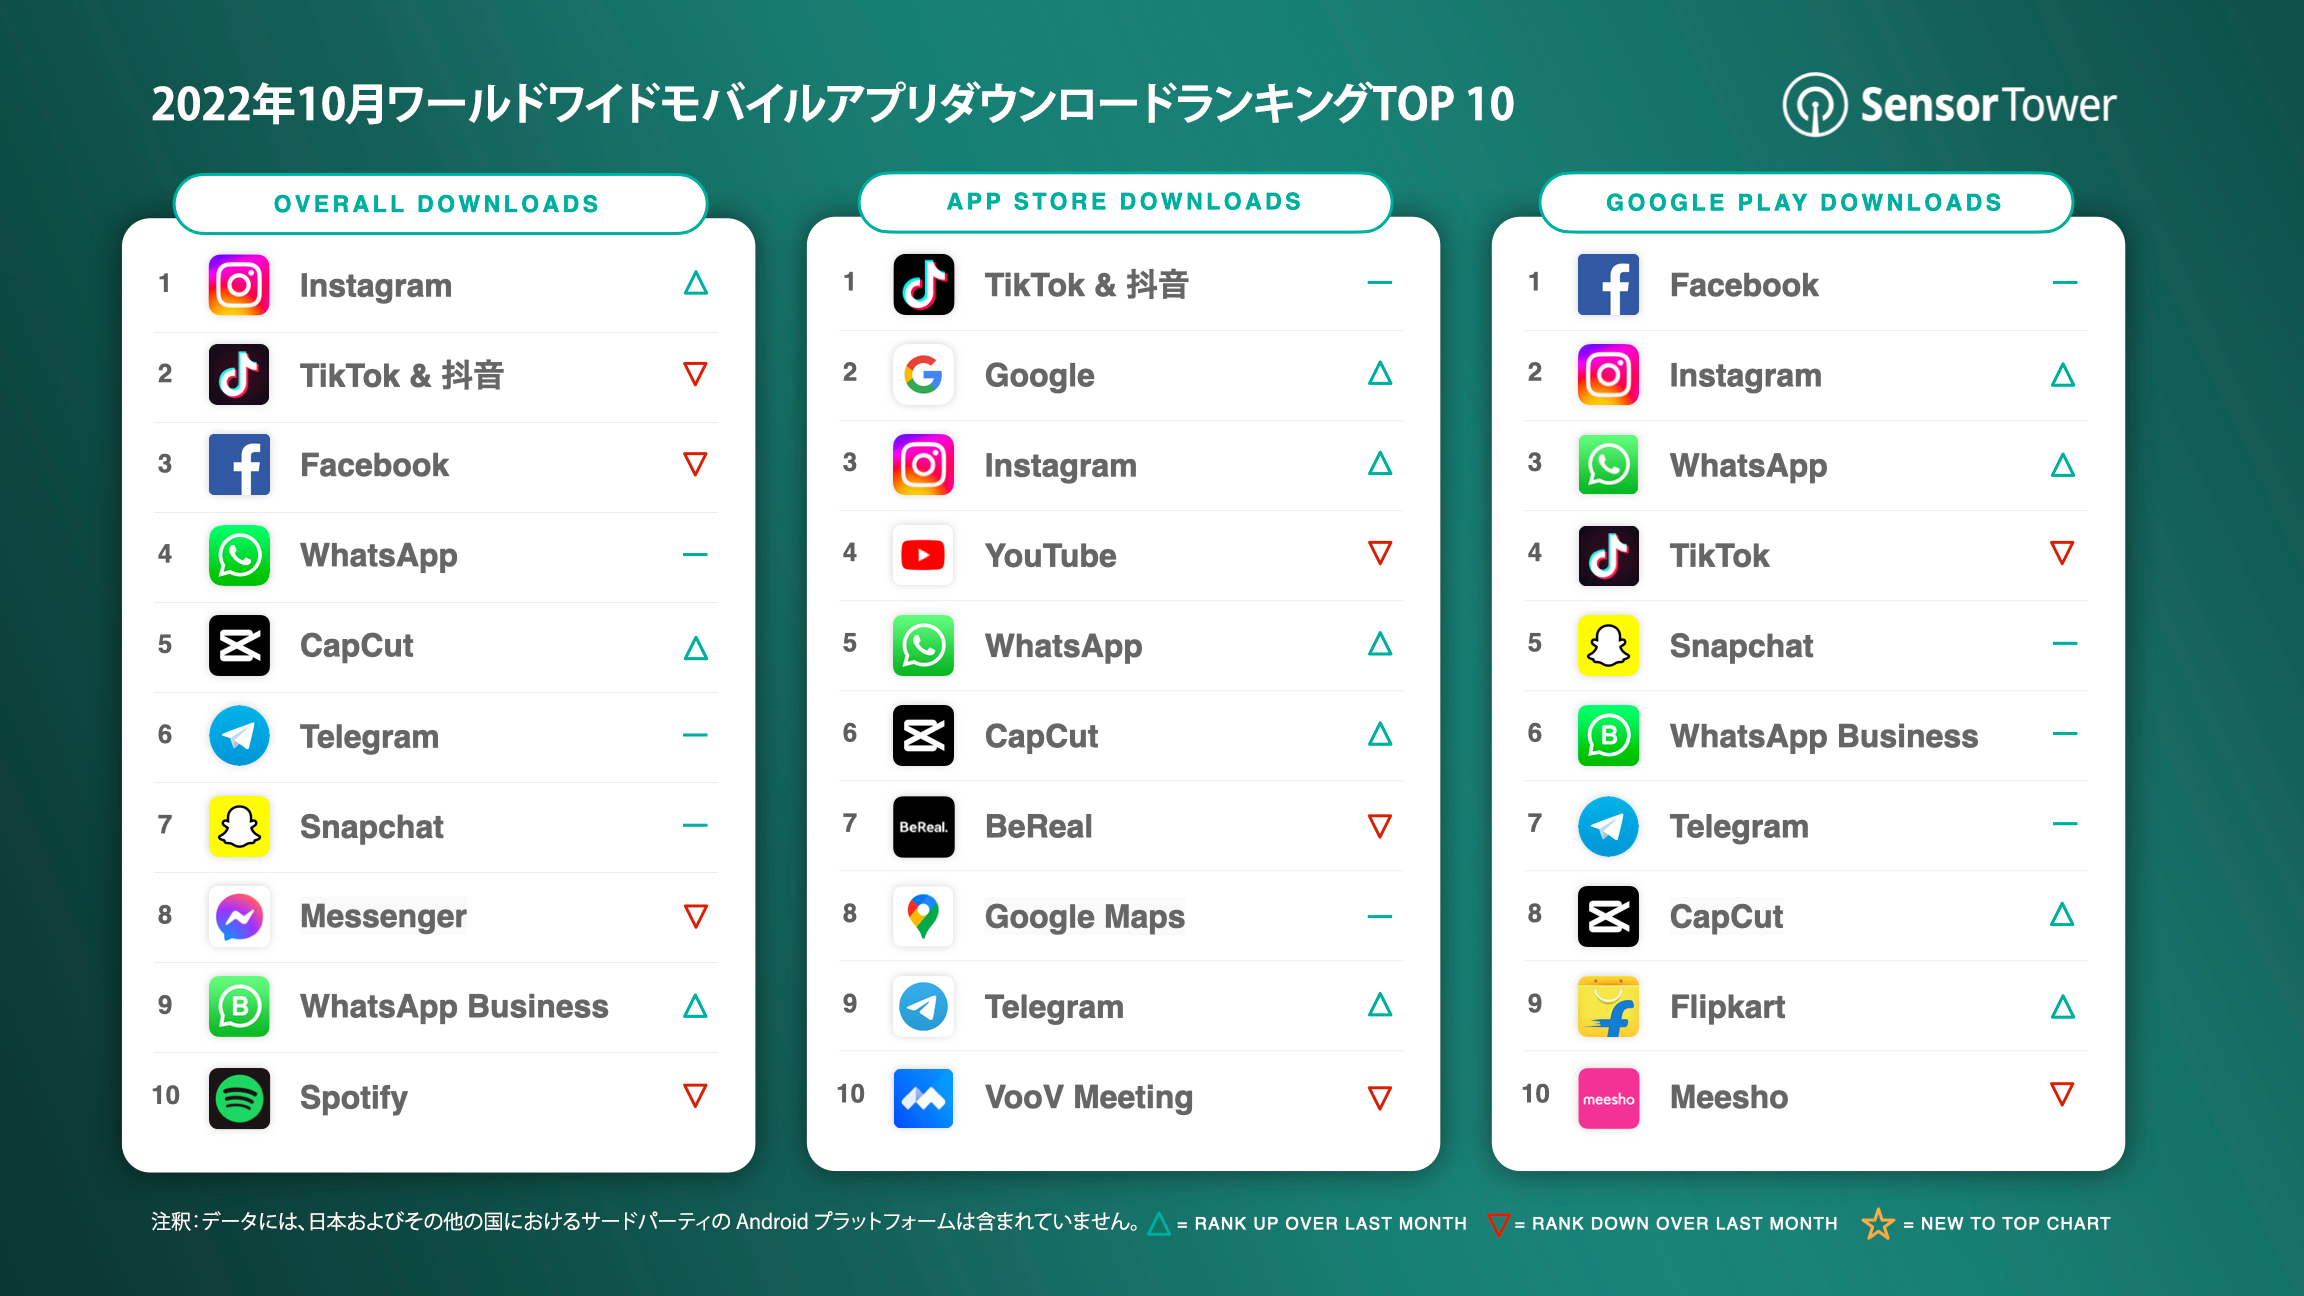 -JP-Top-Apps-Worldwide-for-October-2022-by-Downloads